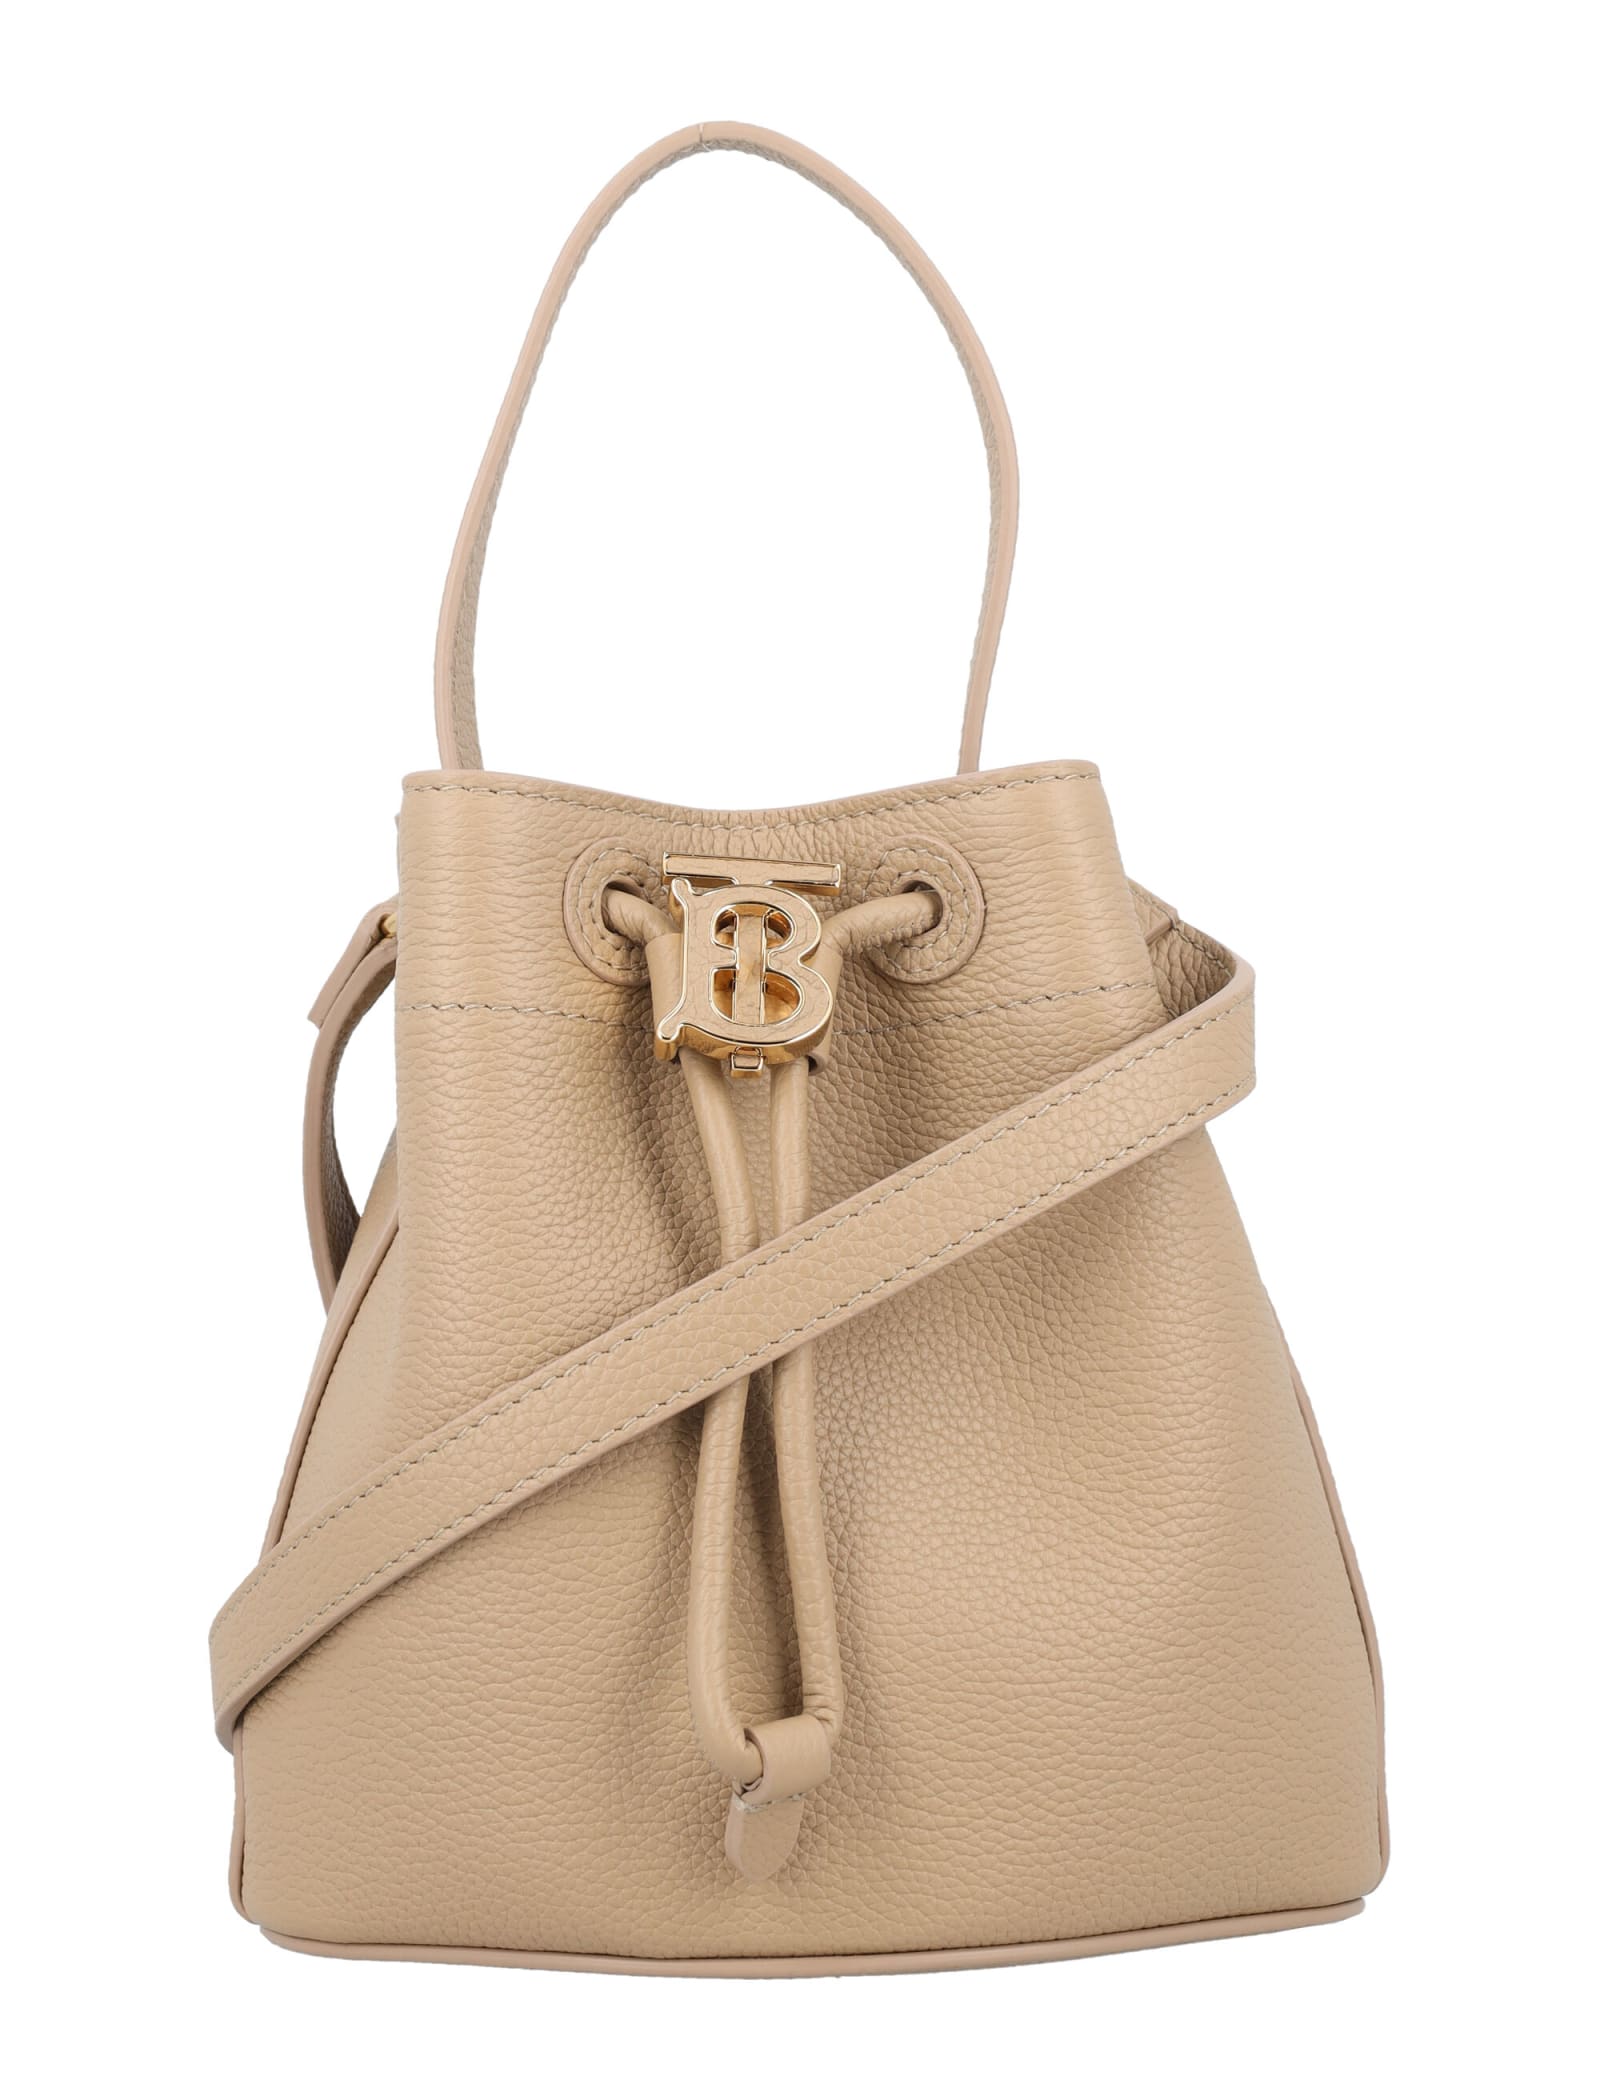 BURBERRY: drawstring bag in grained leather - Beige